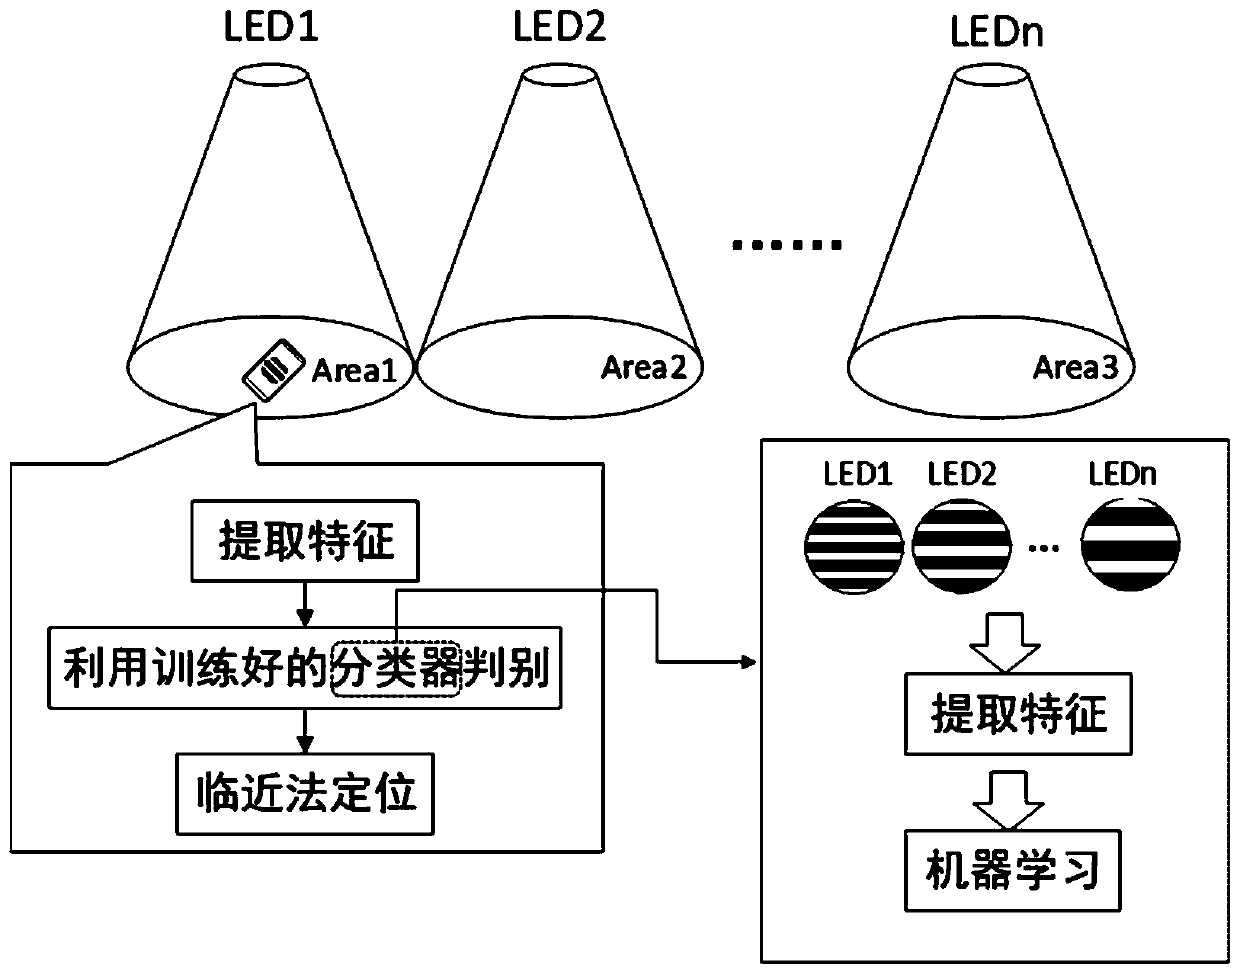 Visual visible light positioning LED-ID detection and recognition method based on machine learning